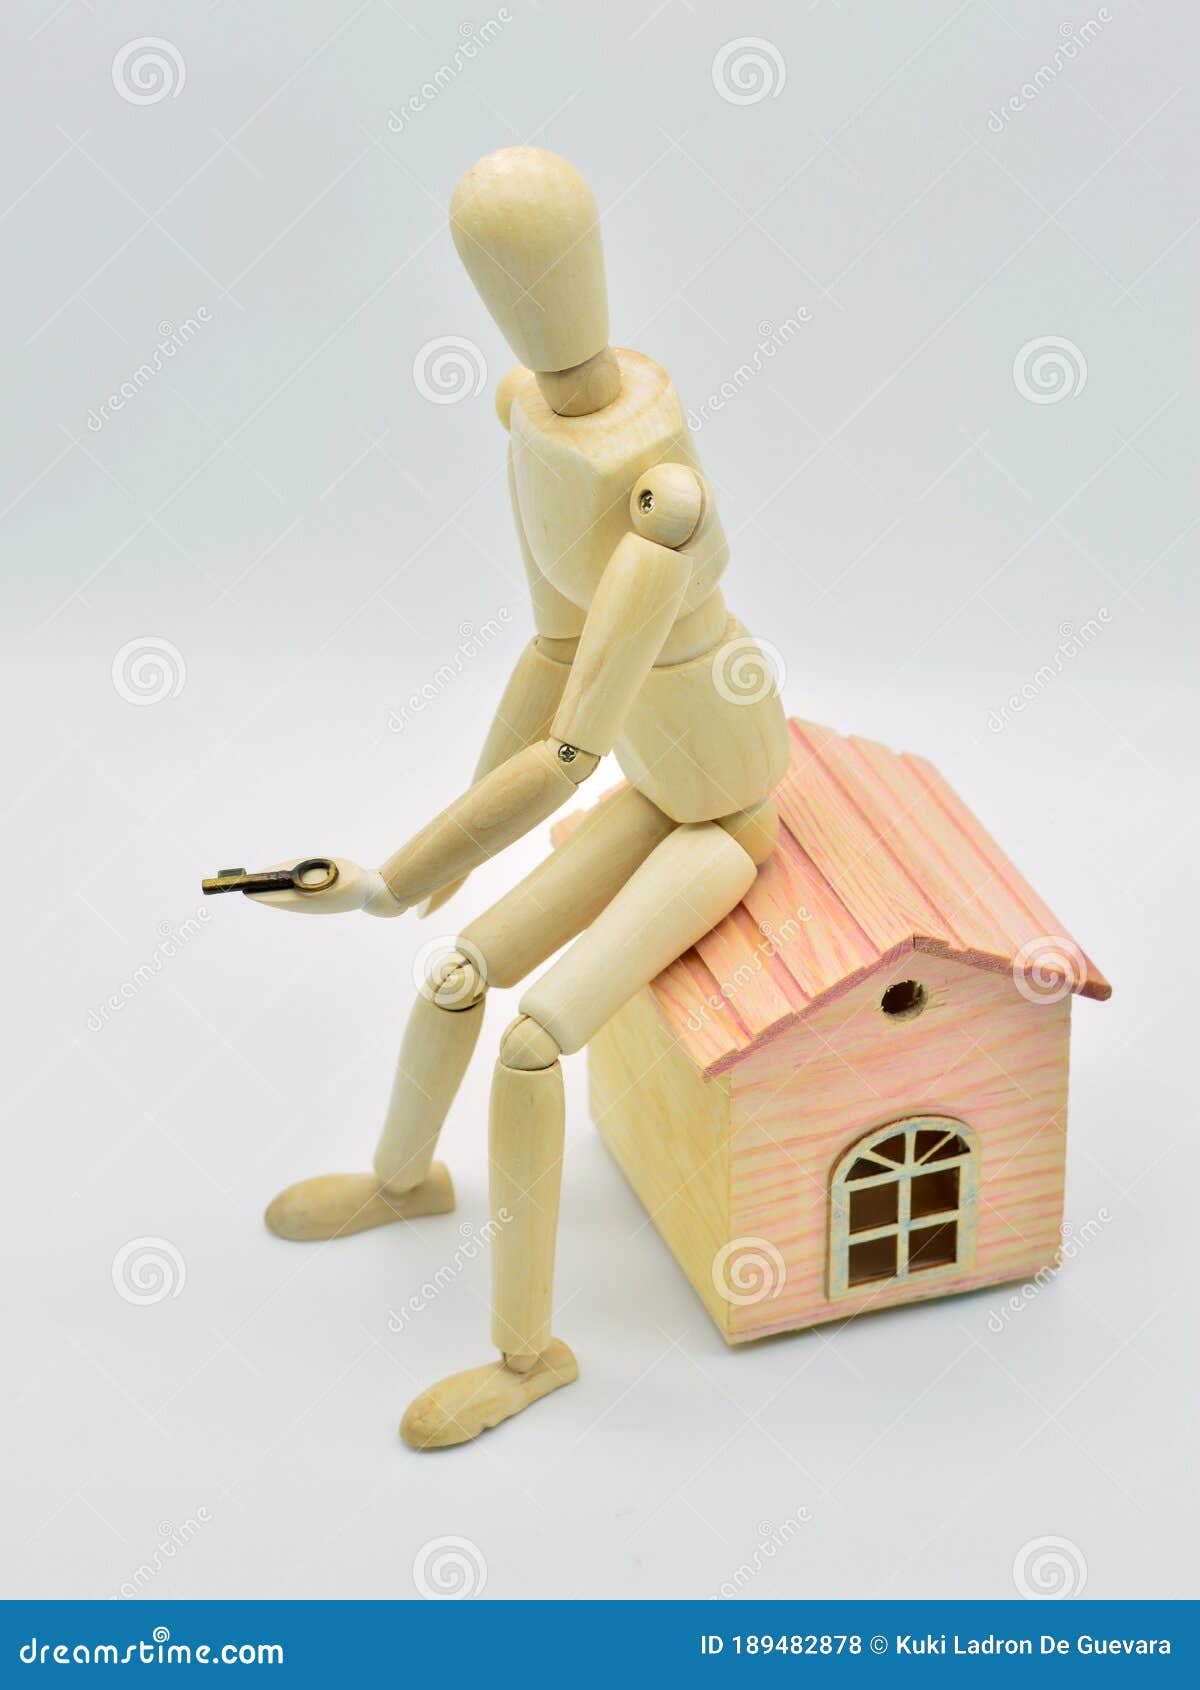 wooden mannequin sitting in a house